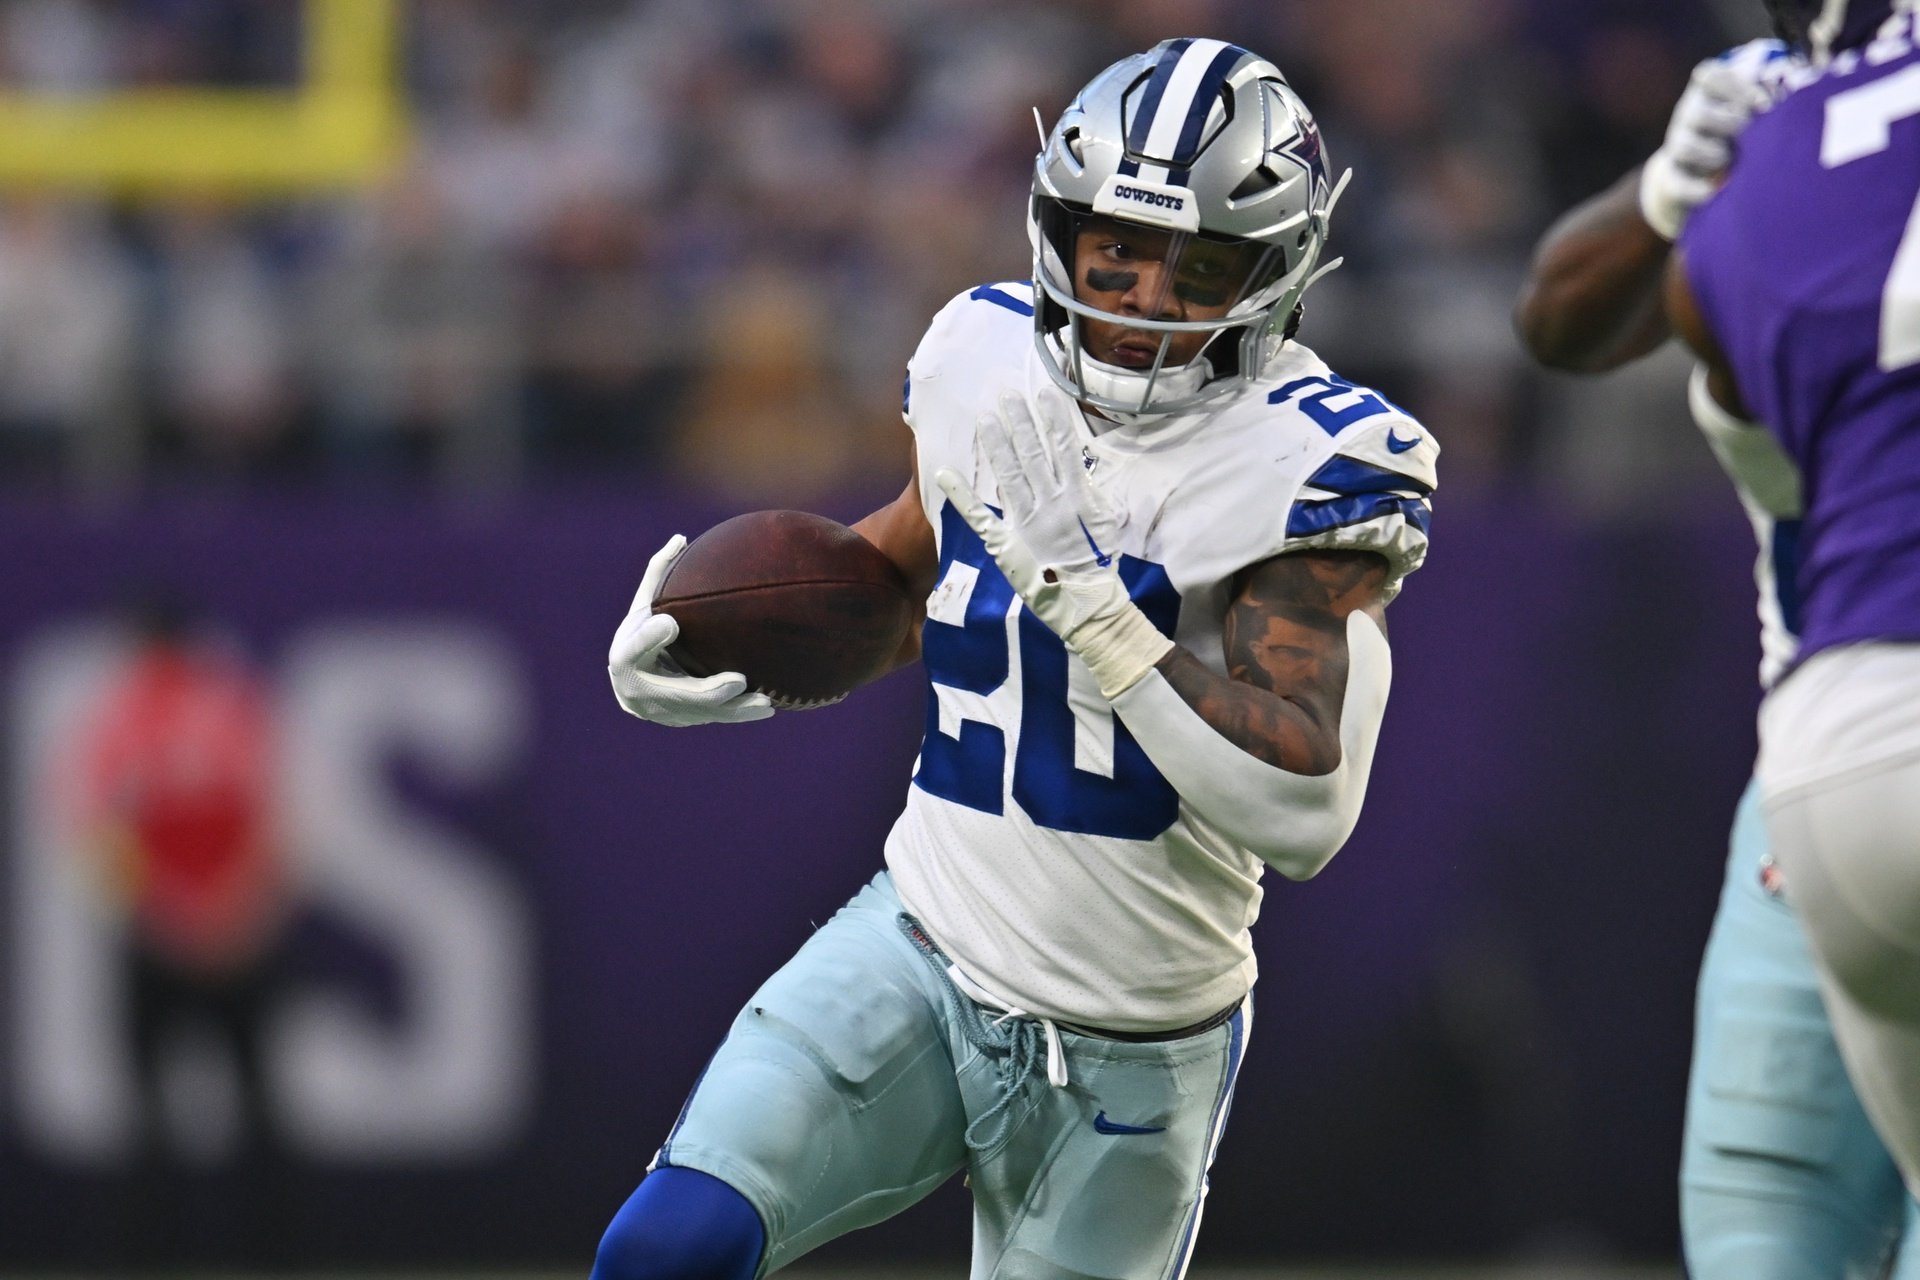 Dallas Cowboys running back Tony Pollard (20) in action during the game against the Minnesota Vikings at U.S. Bank Stadium.